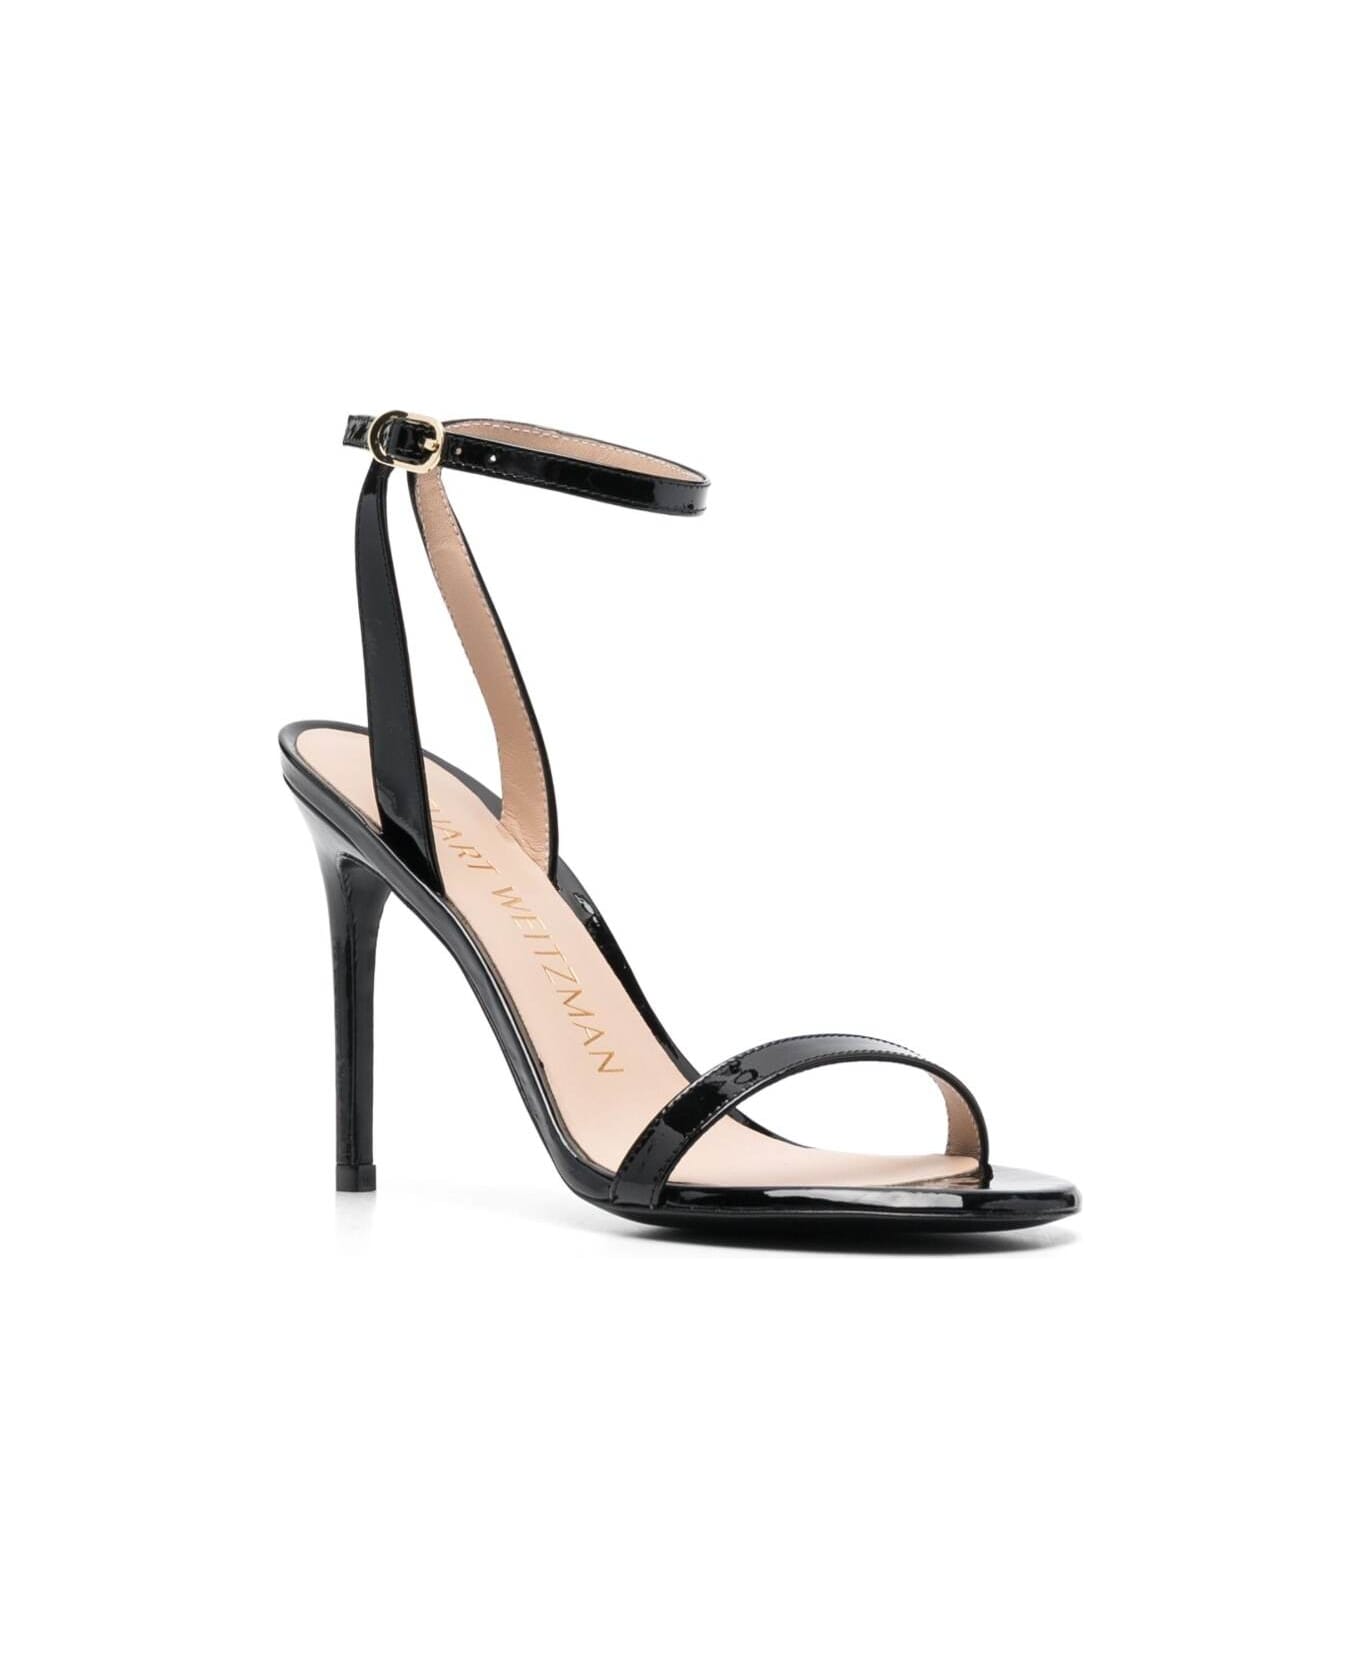 Stuart Weitzman 'barely Nude' Black Sandals With Stiletto Heel In Patent Leather Woman - Black サンダル